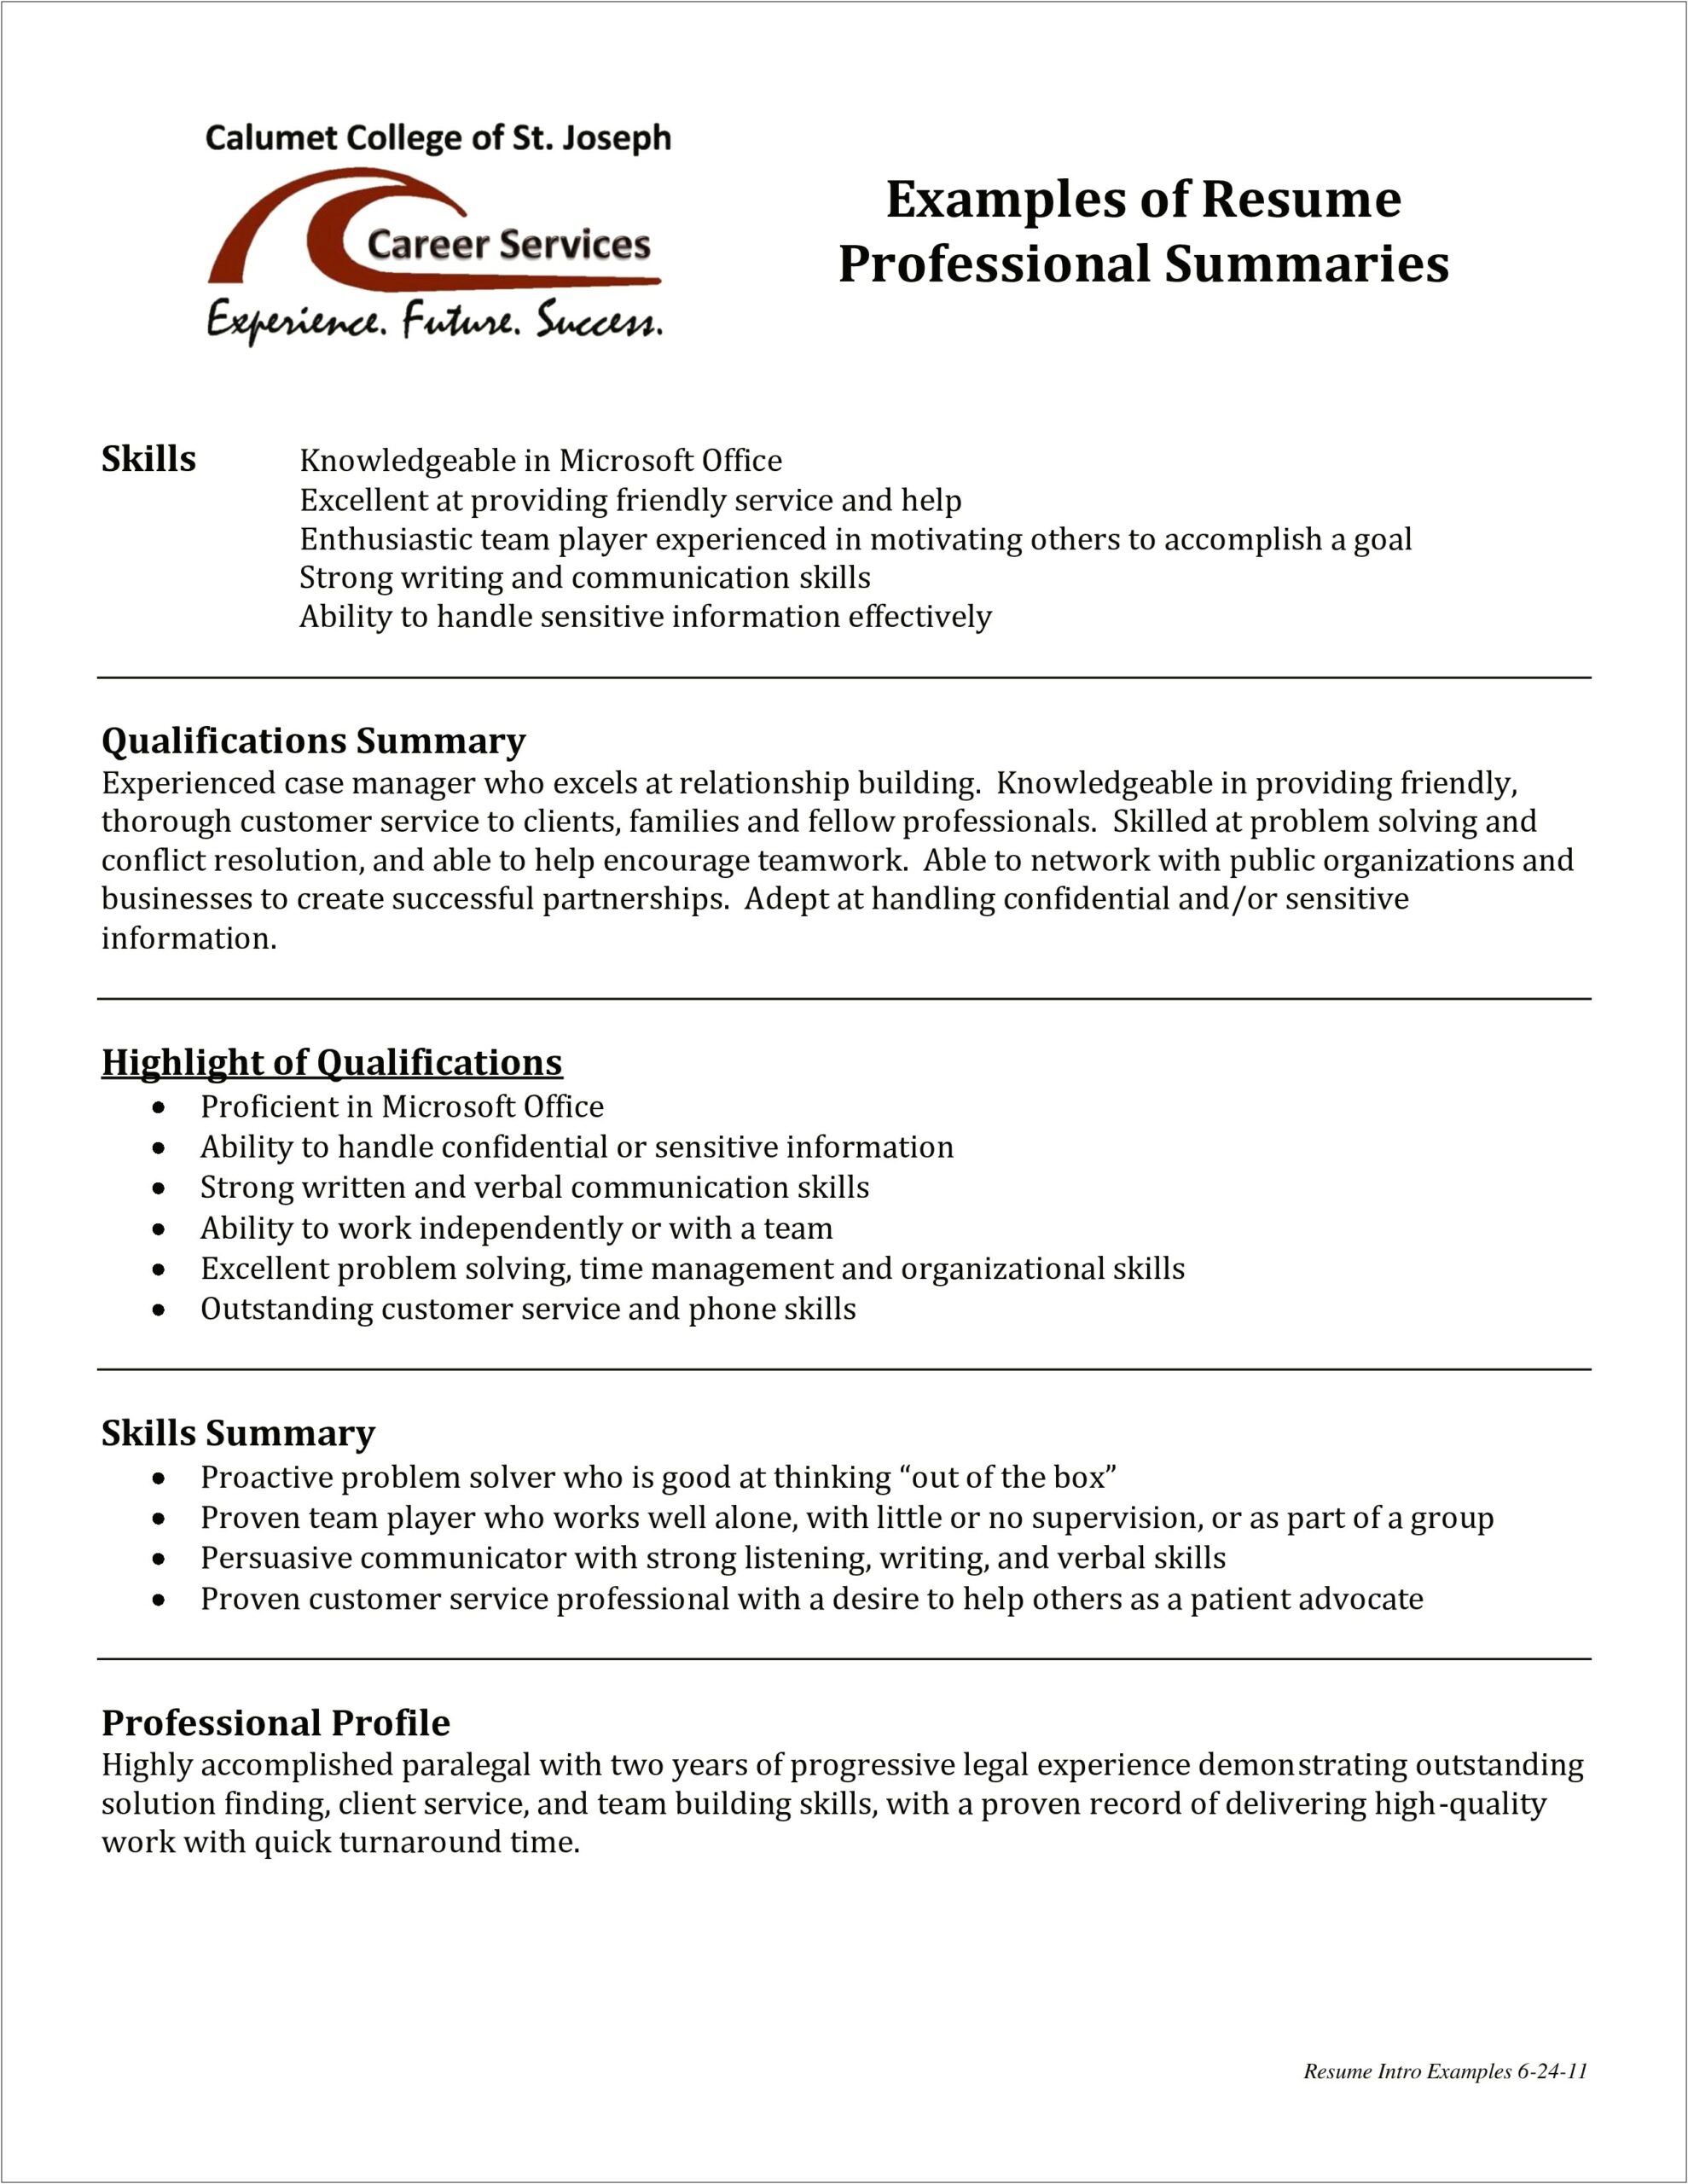 Creating A Professional Summary For A Resume